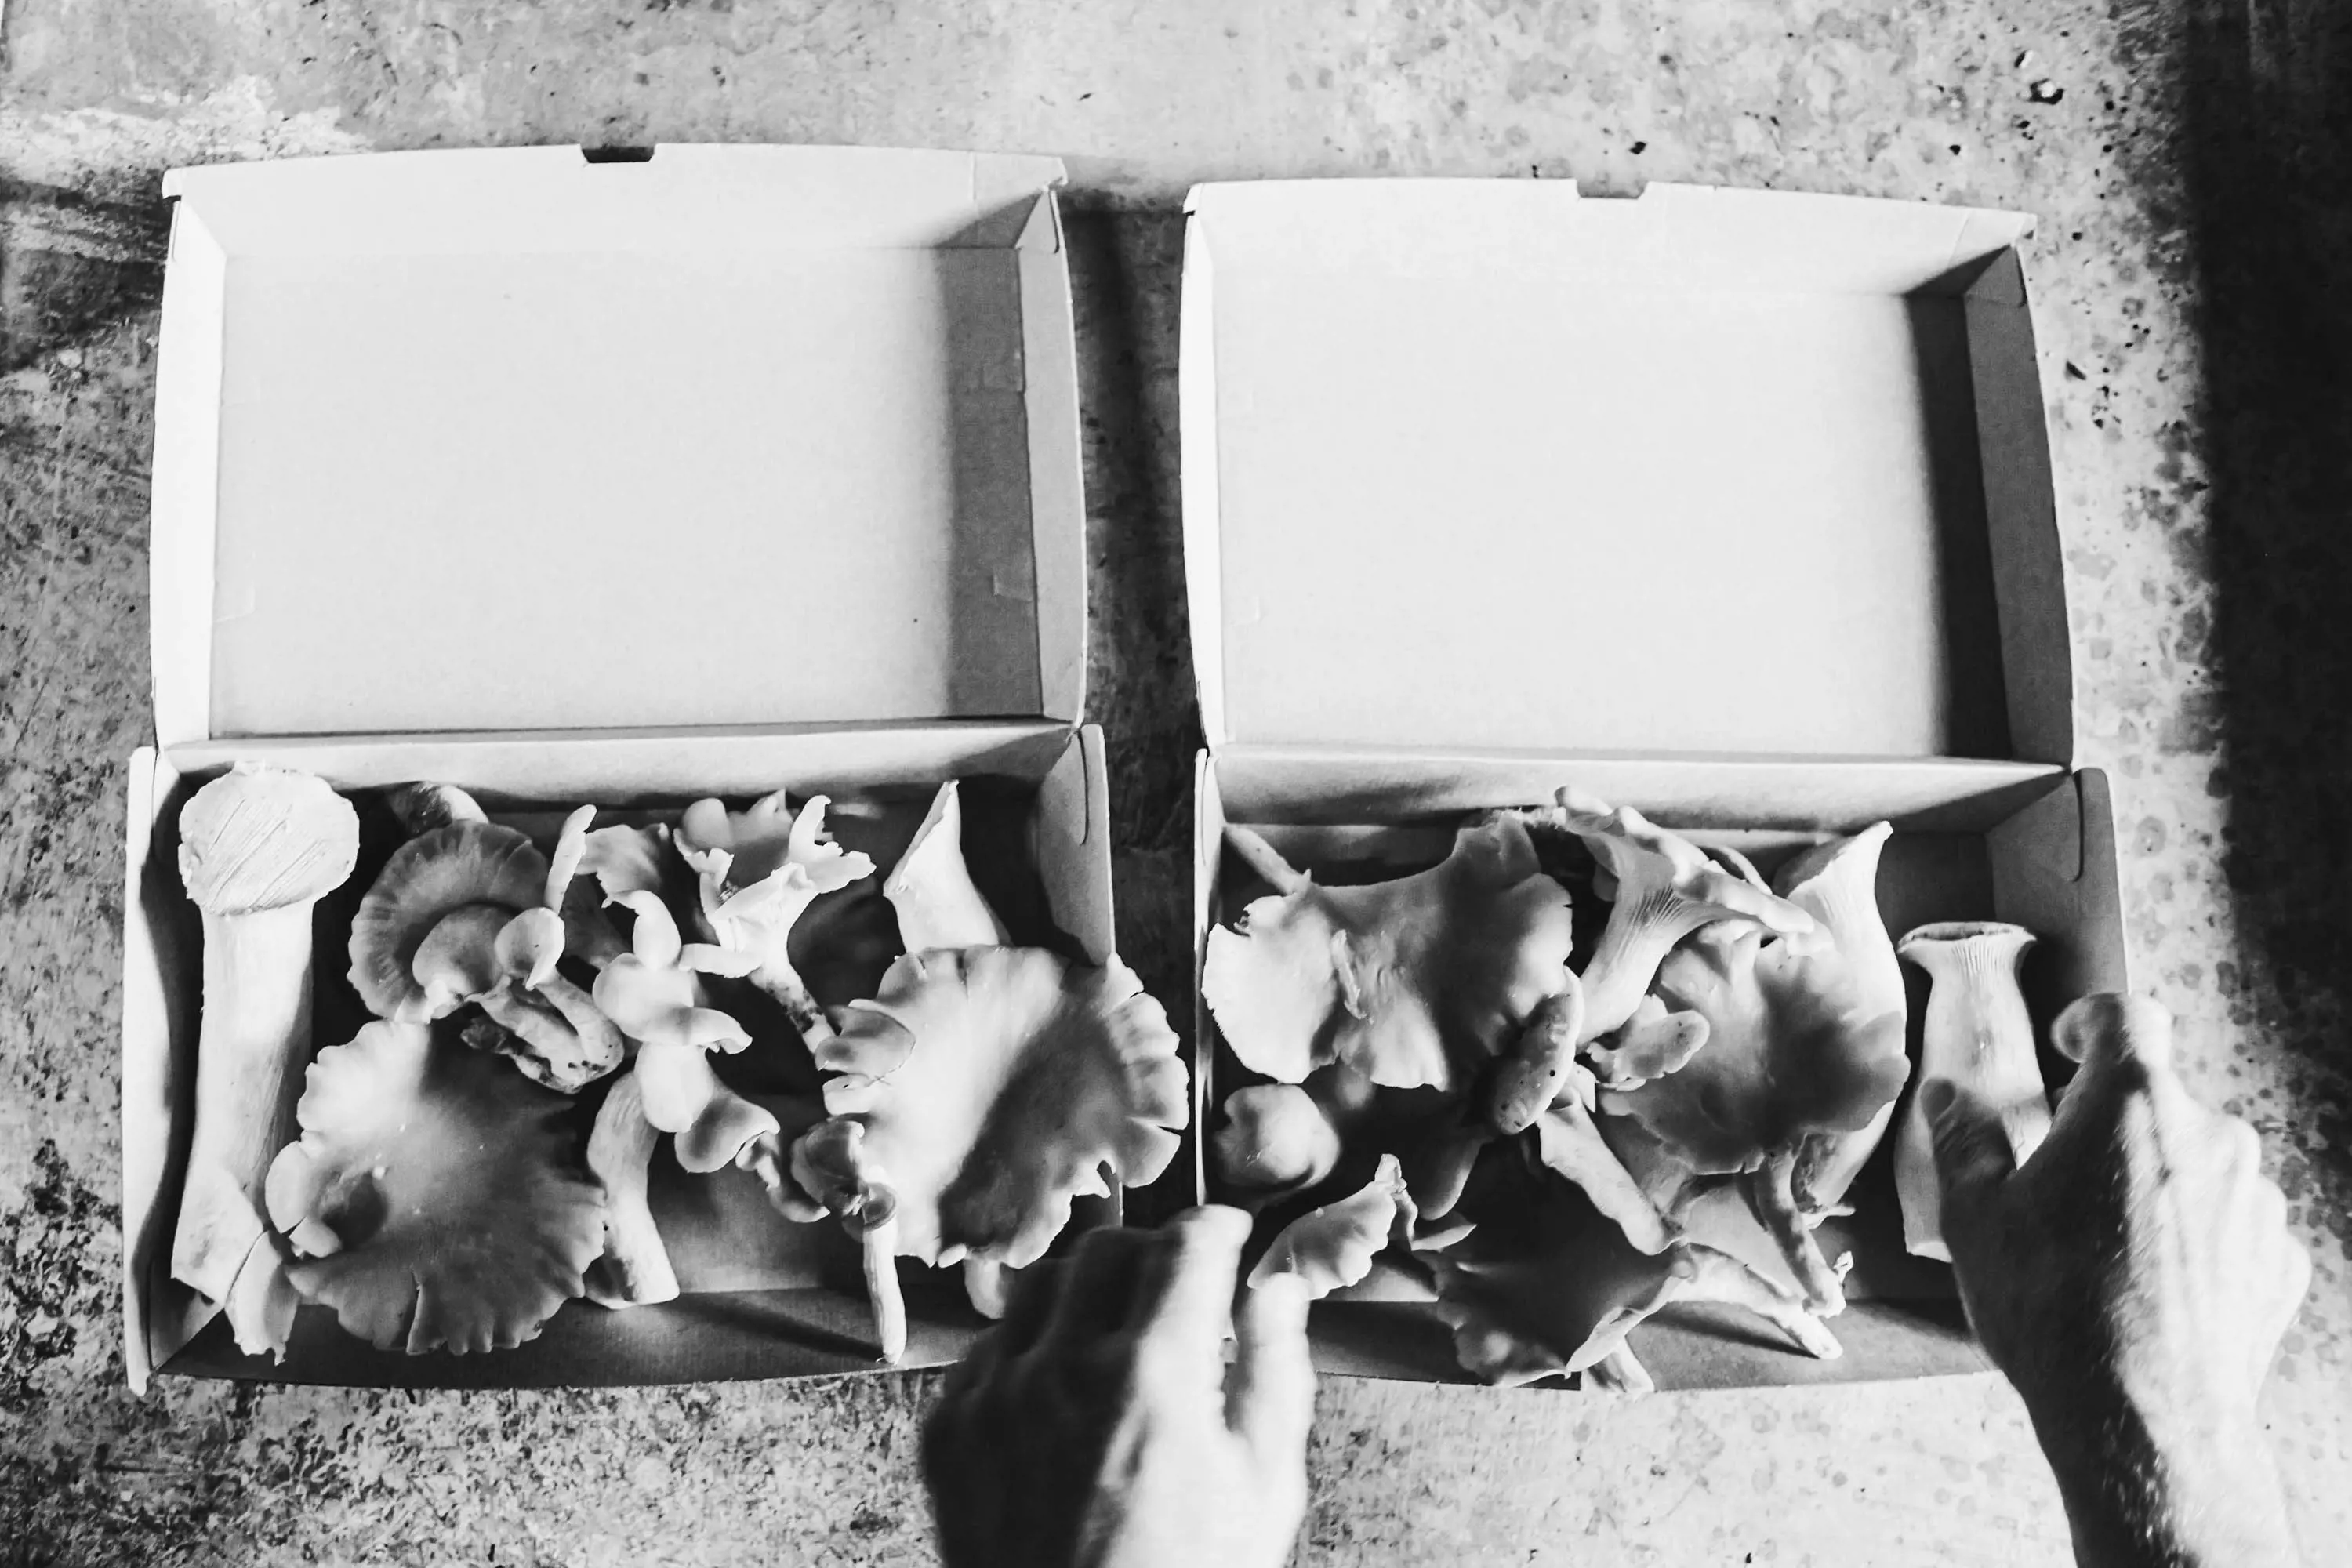 Oyster mushrooms placed into cardboard boxes,